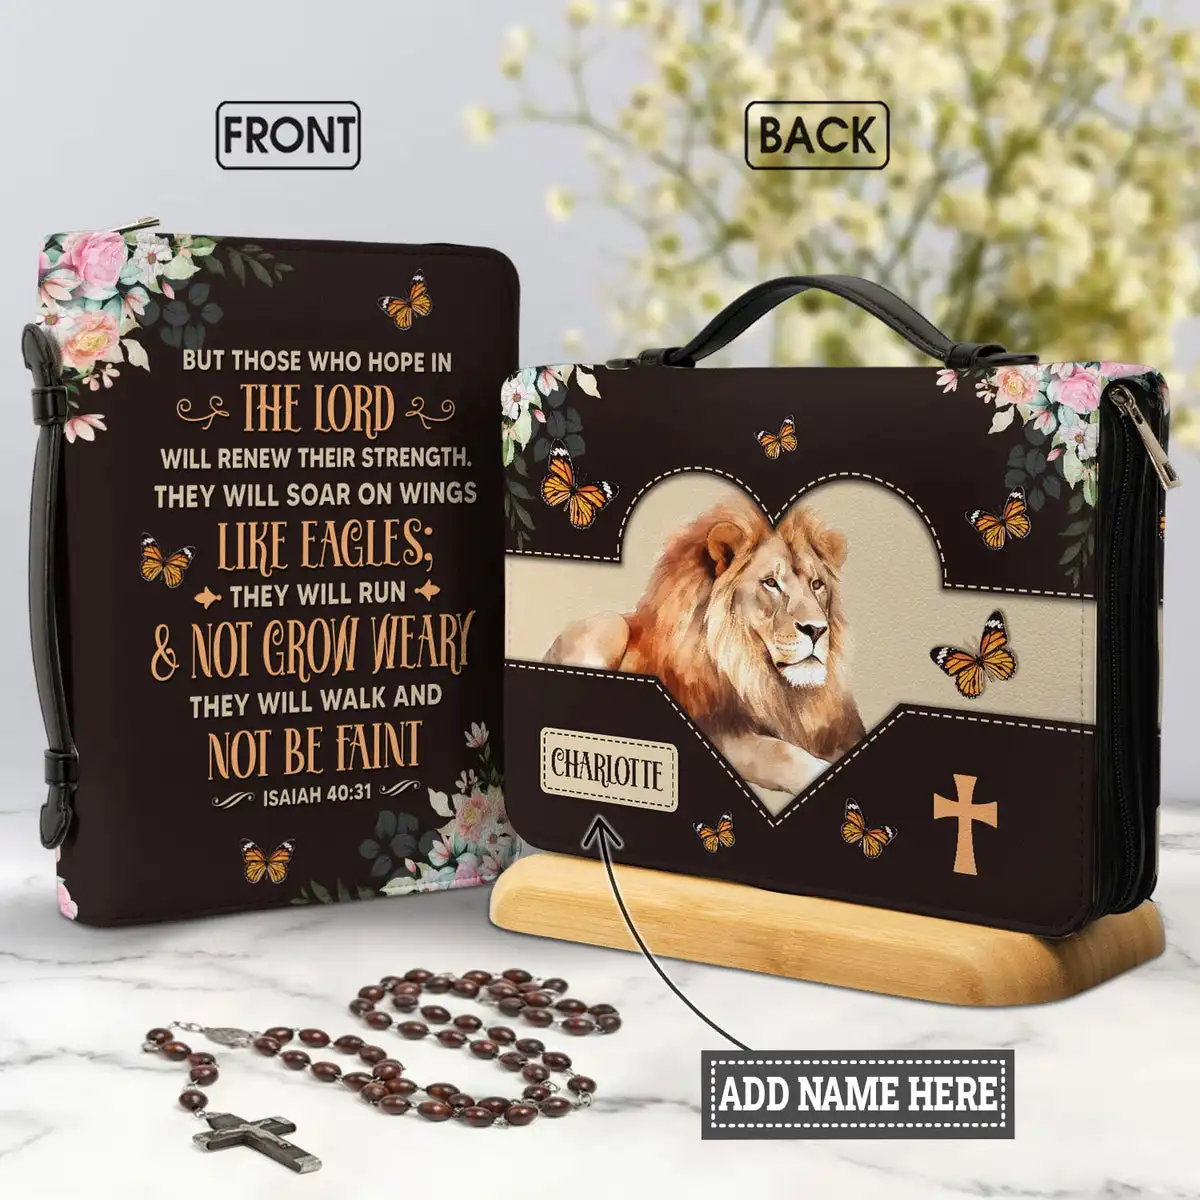 

But Those Who Hope In The Lord Will Renew Their Strength Bible Cover Case Women's Storage Bag Leather Zipper Handbag Holy Bolsas